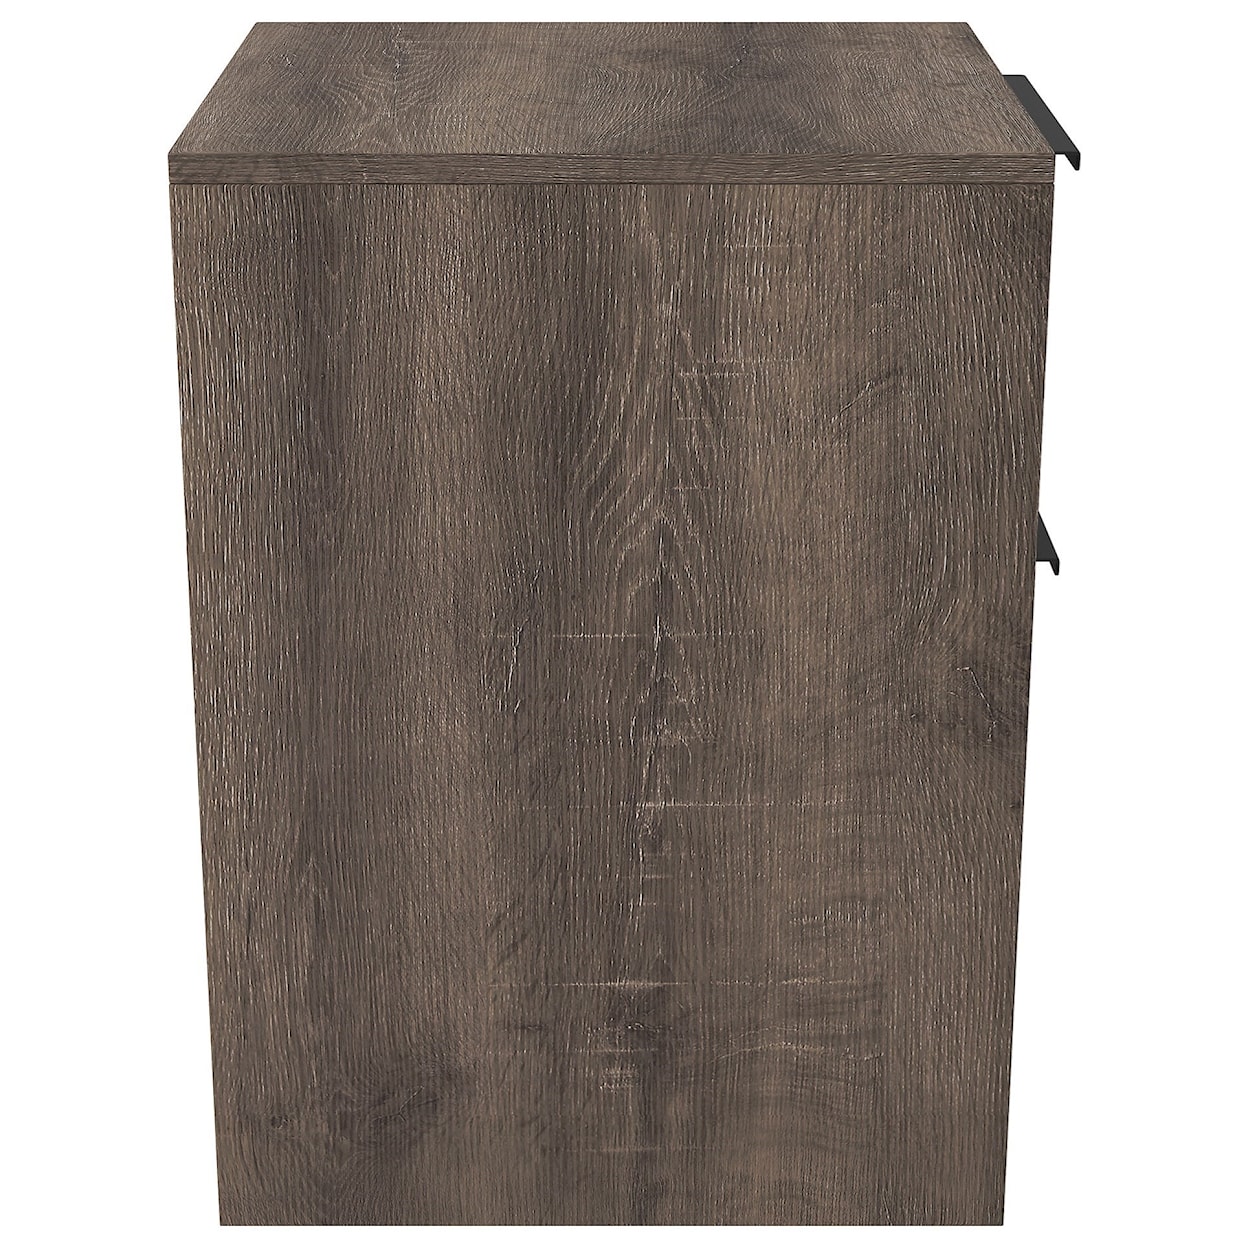 Signature Design by Ashley Arlenbry File Cabinet